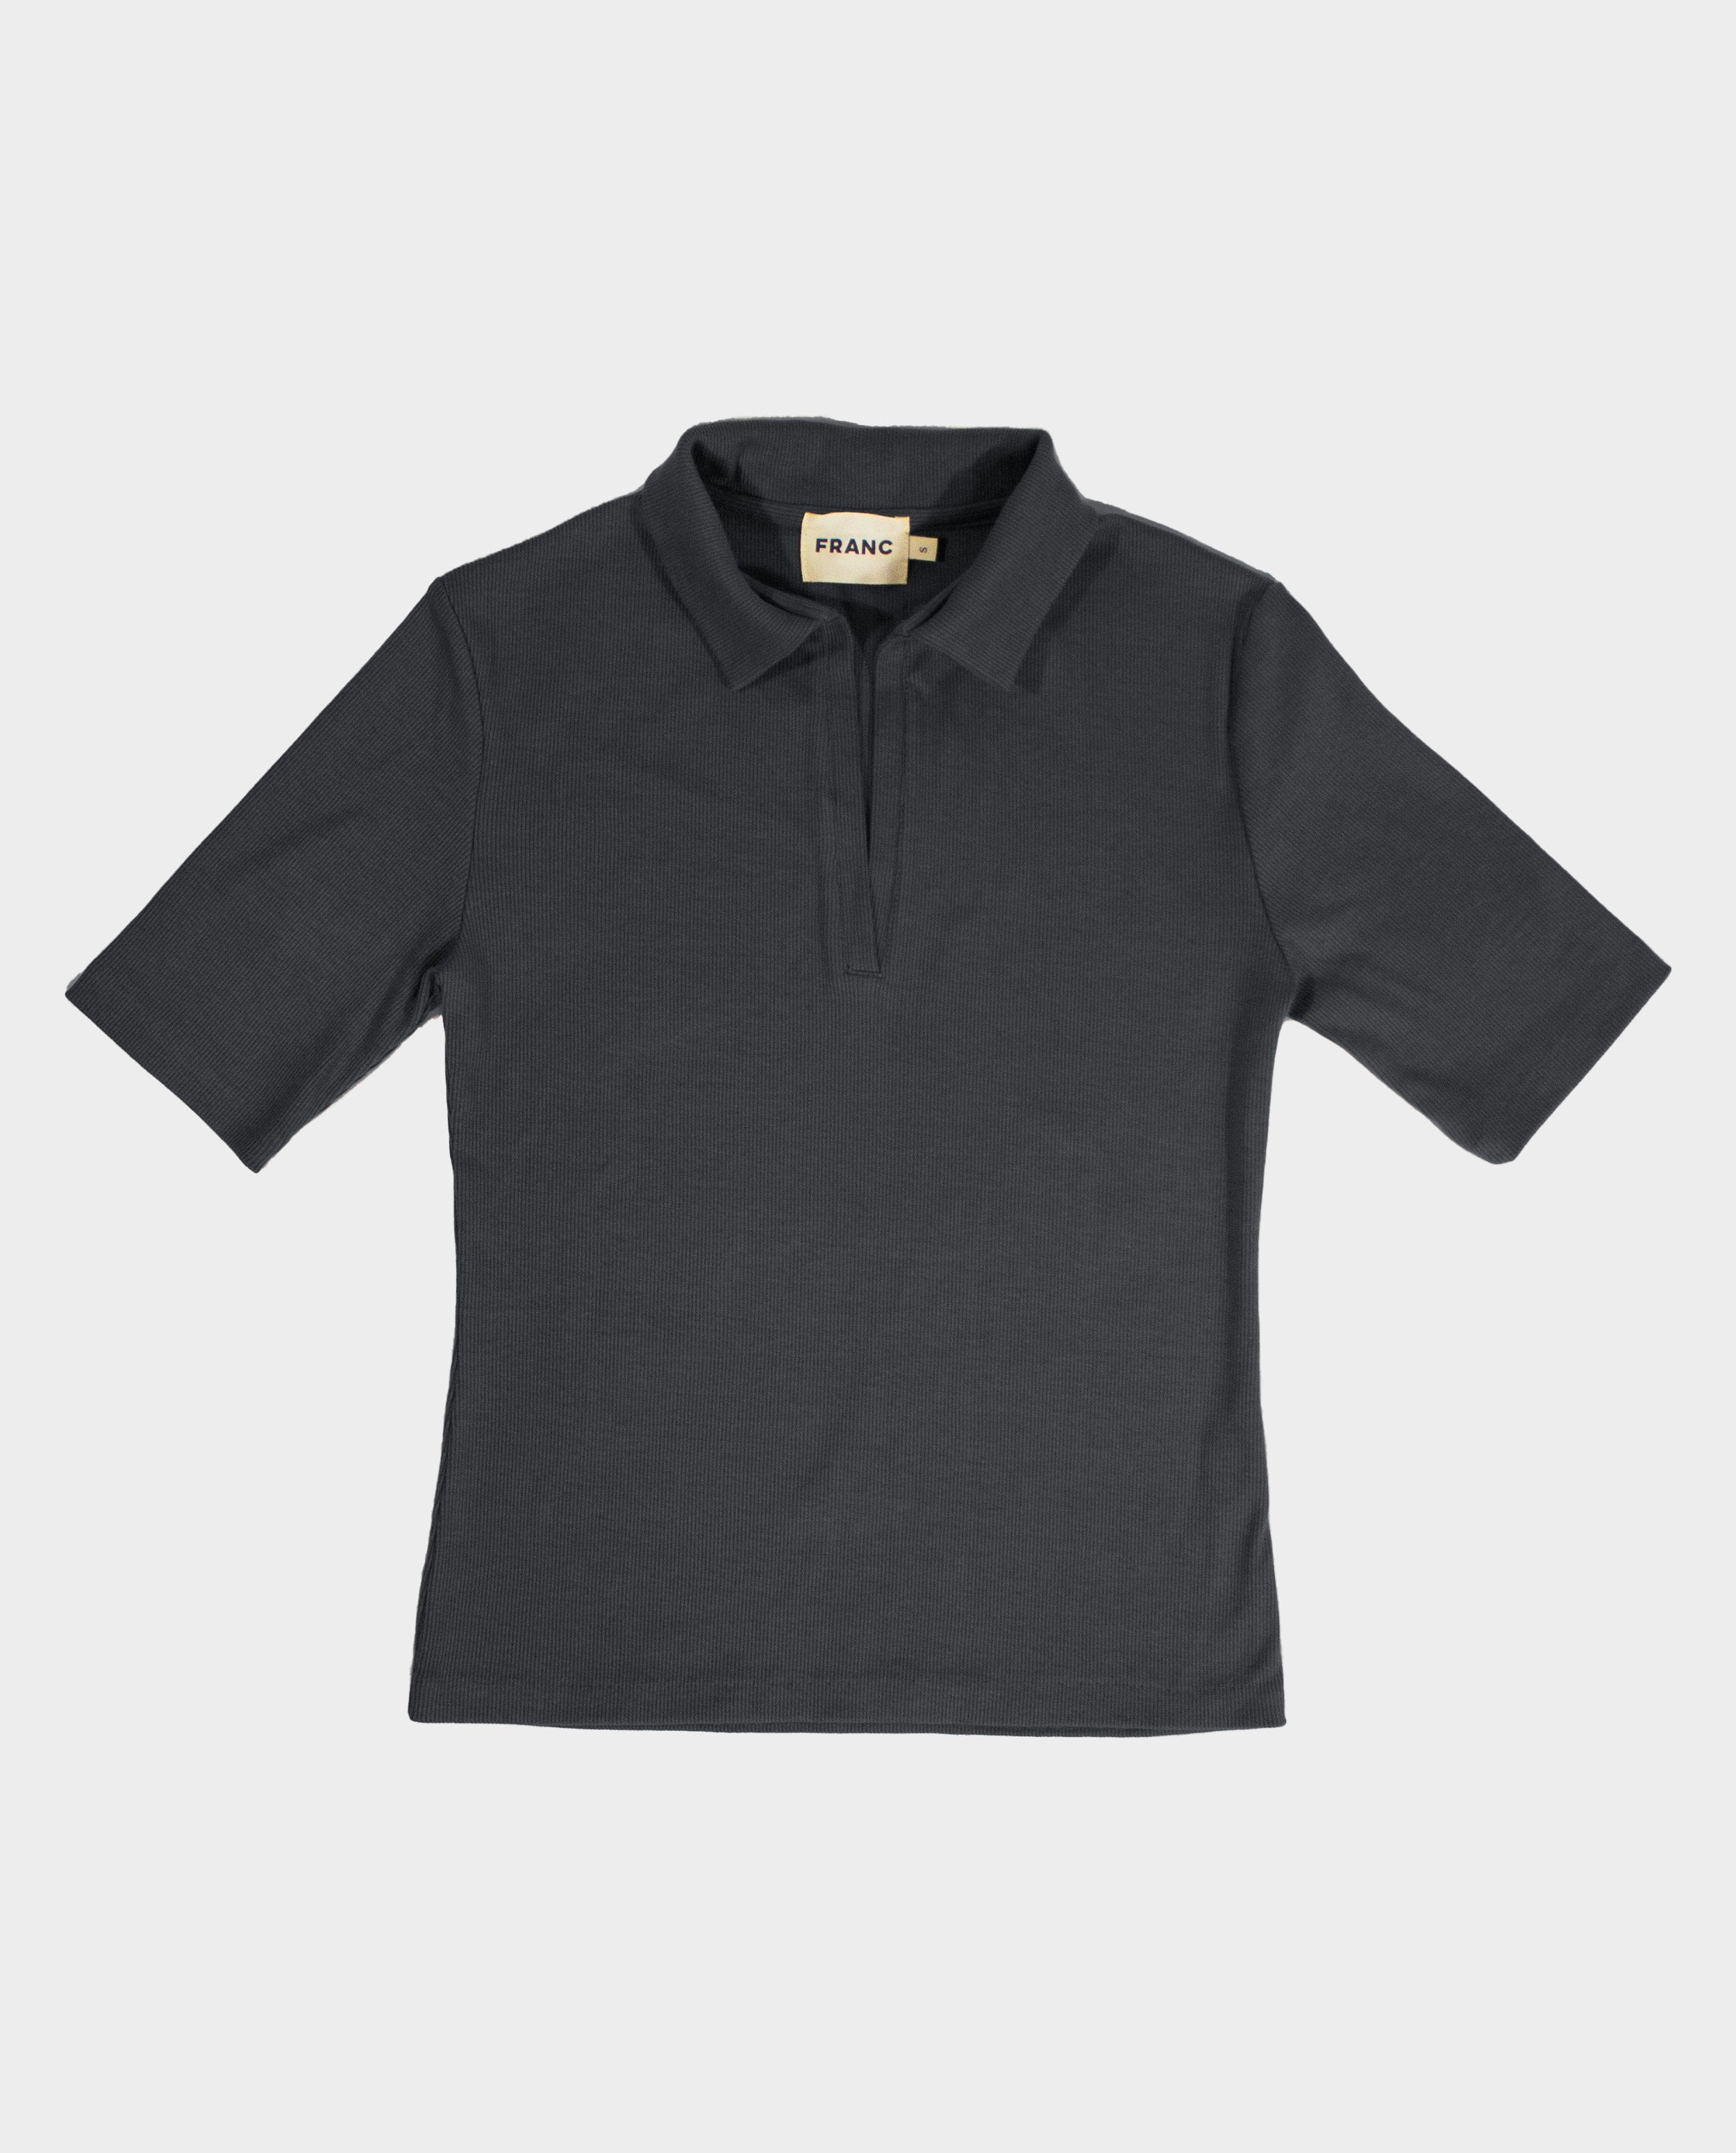 The Rib Polo Shirt in Ash | FRANC Sustainable Clothing